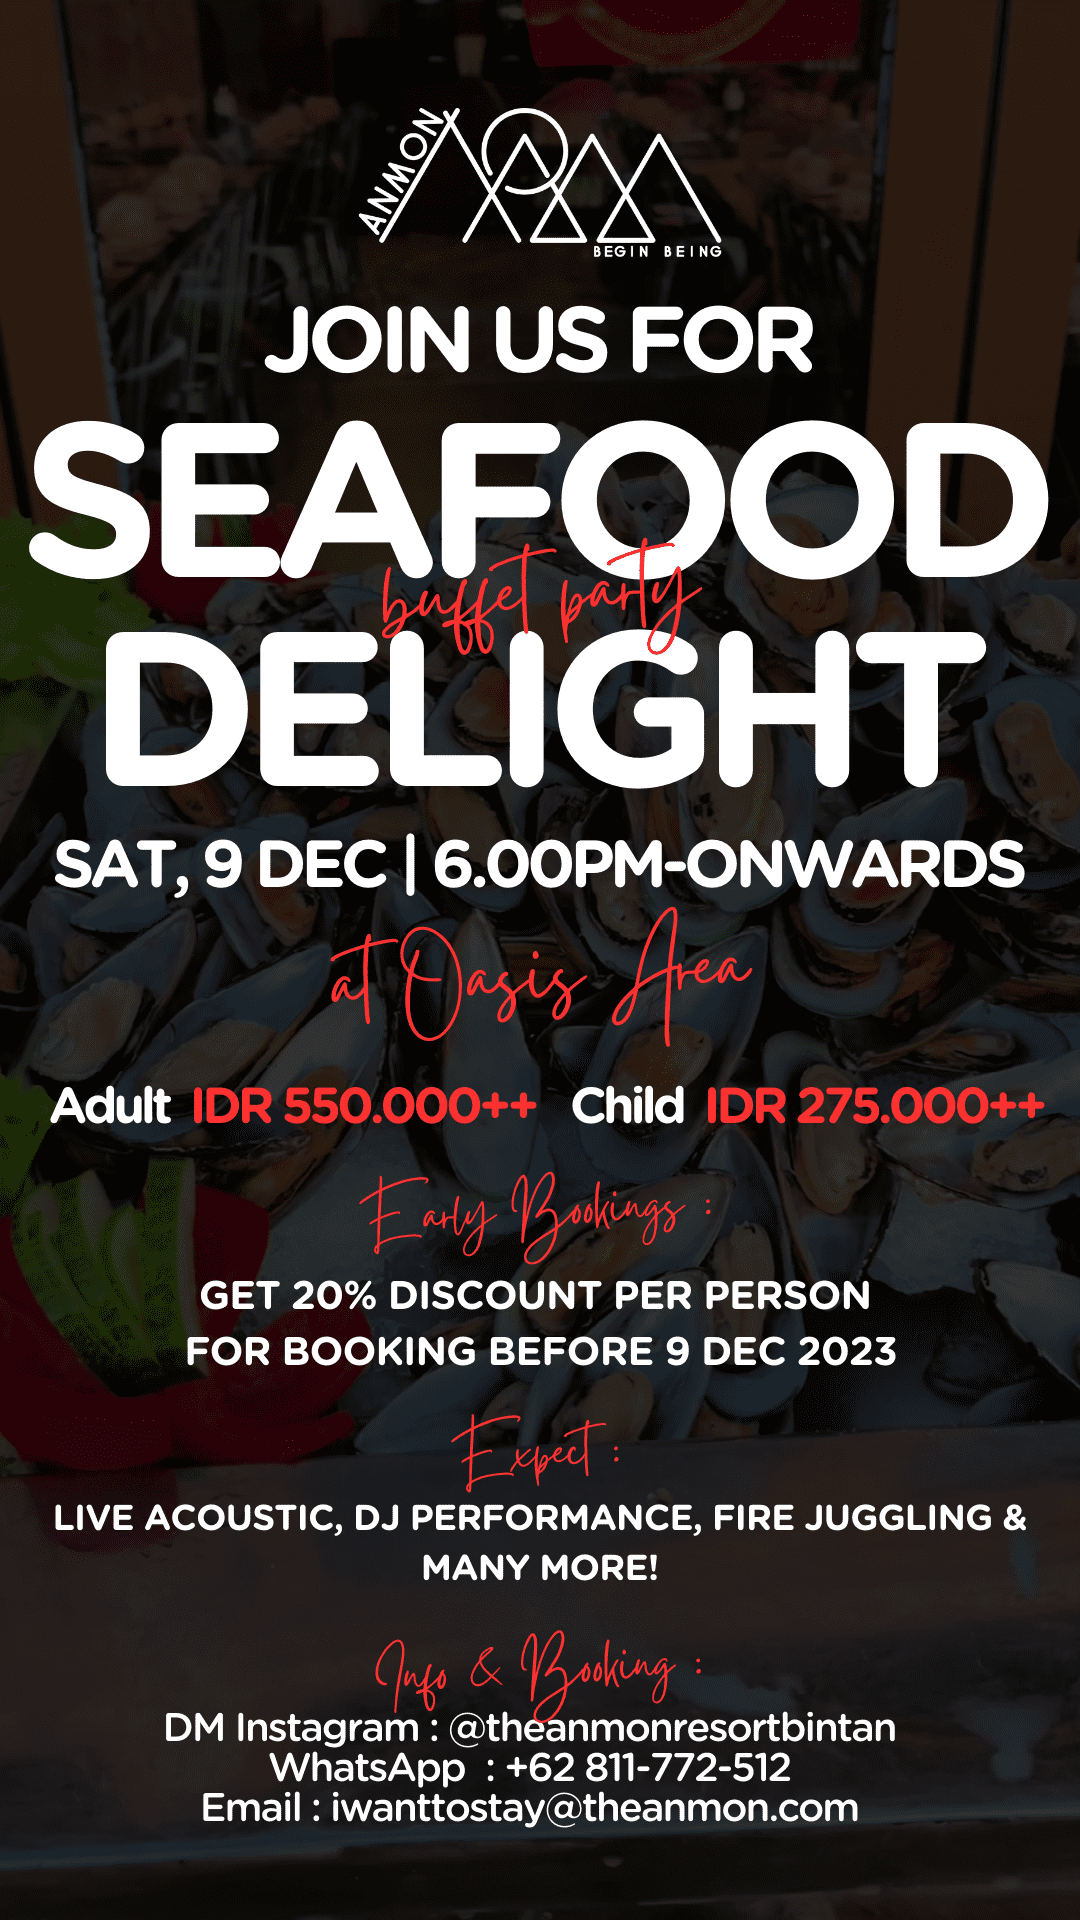 9 Dec - Seafood Delight Buffet Party